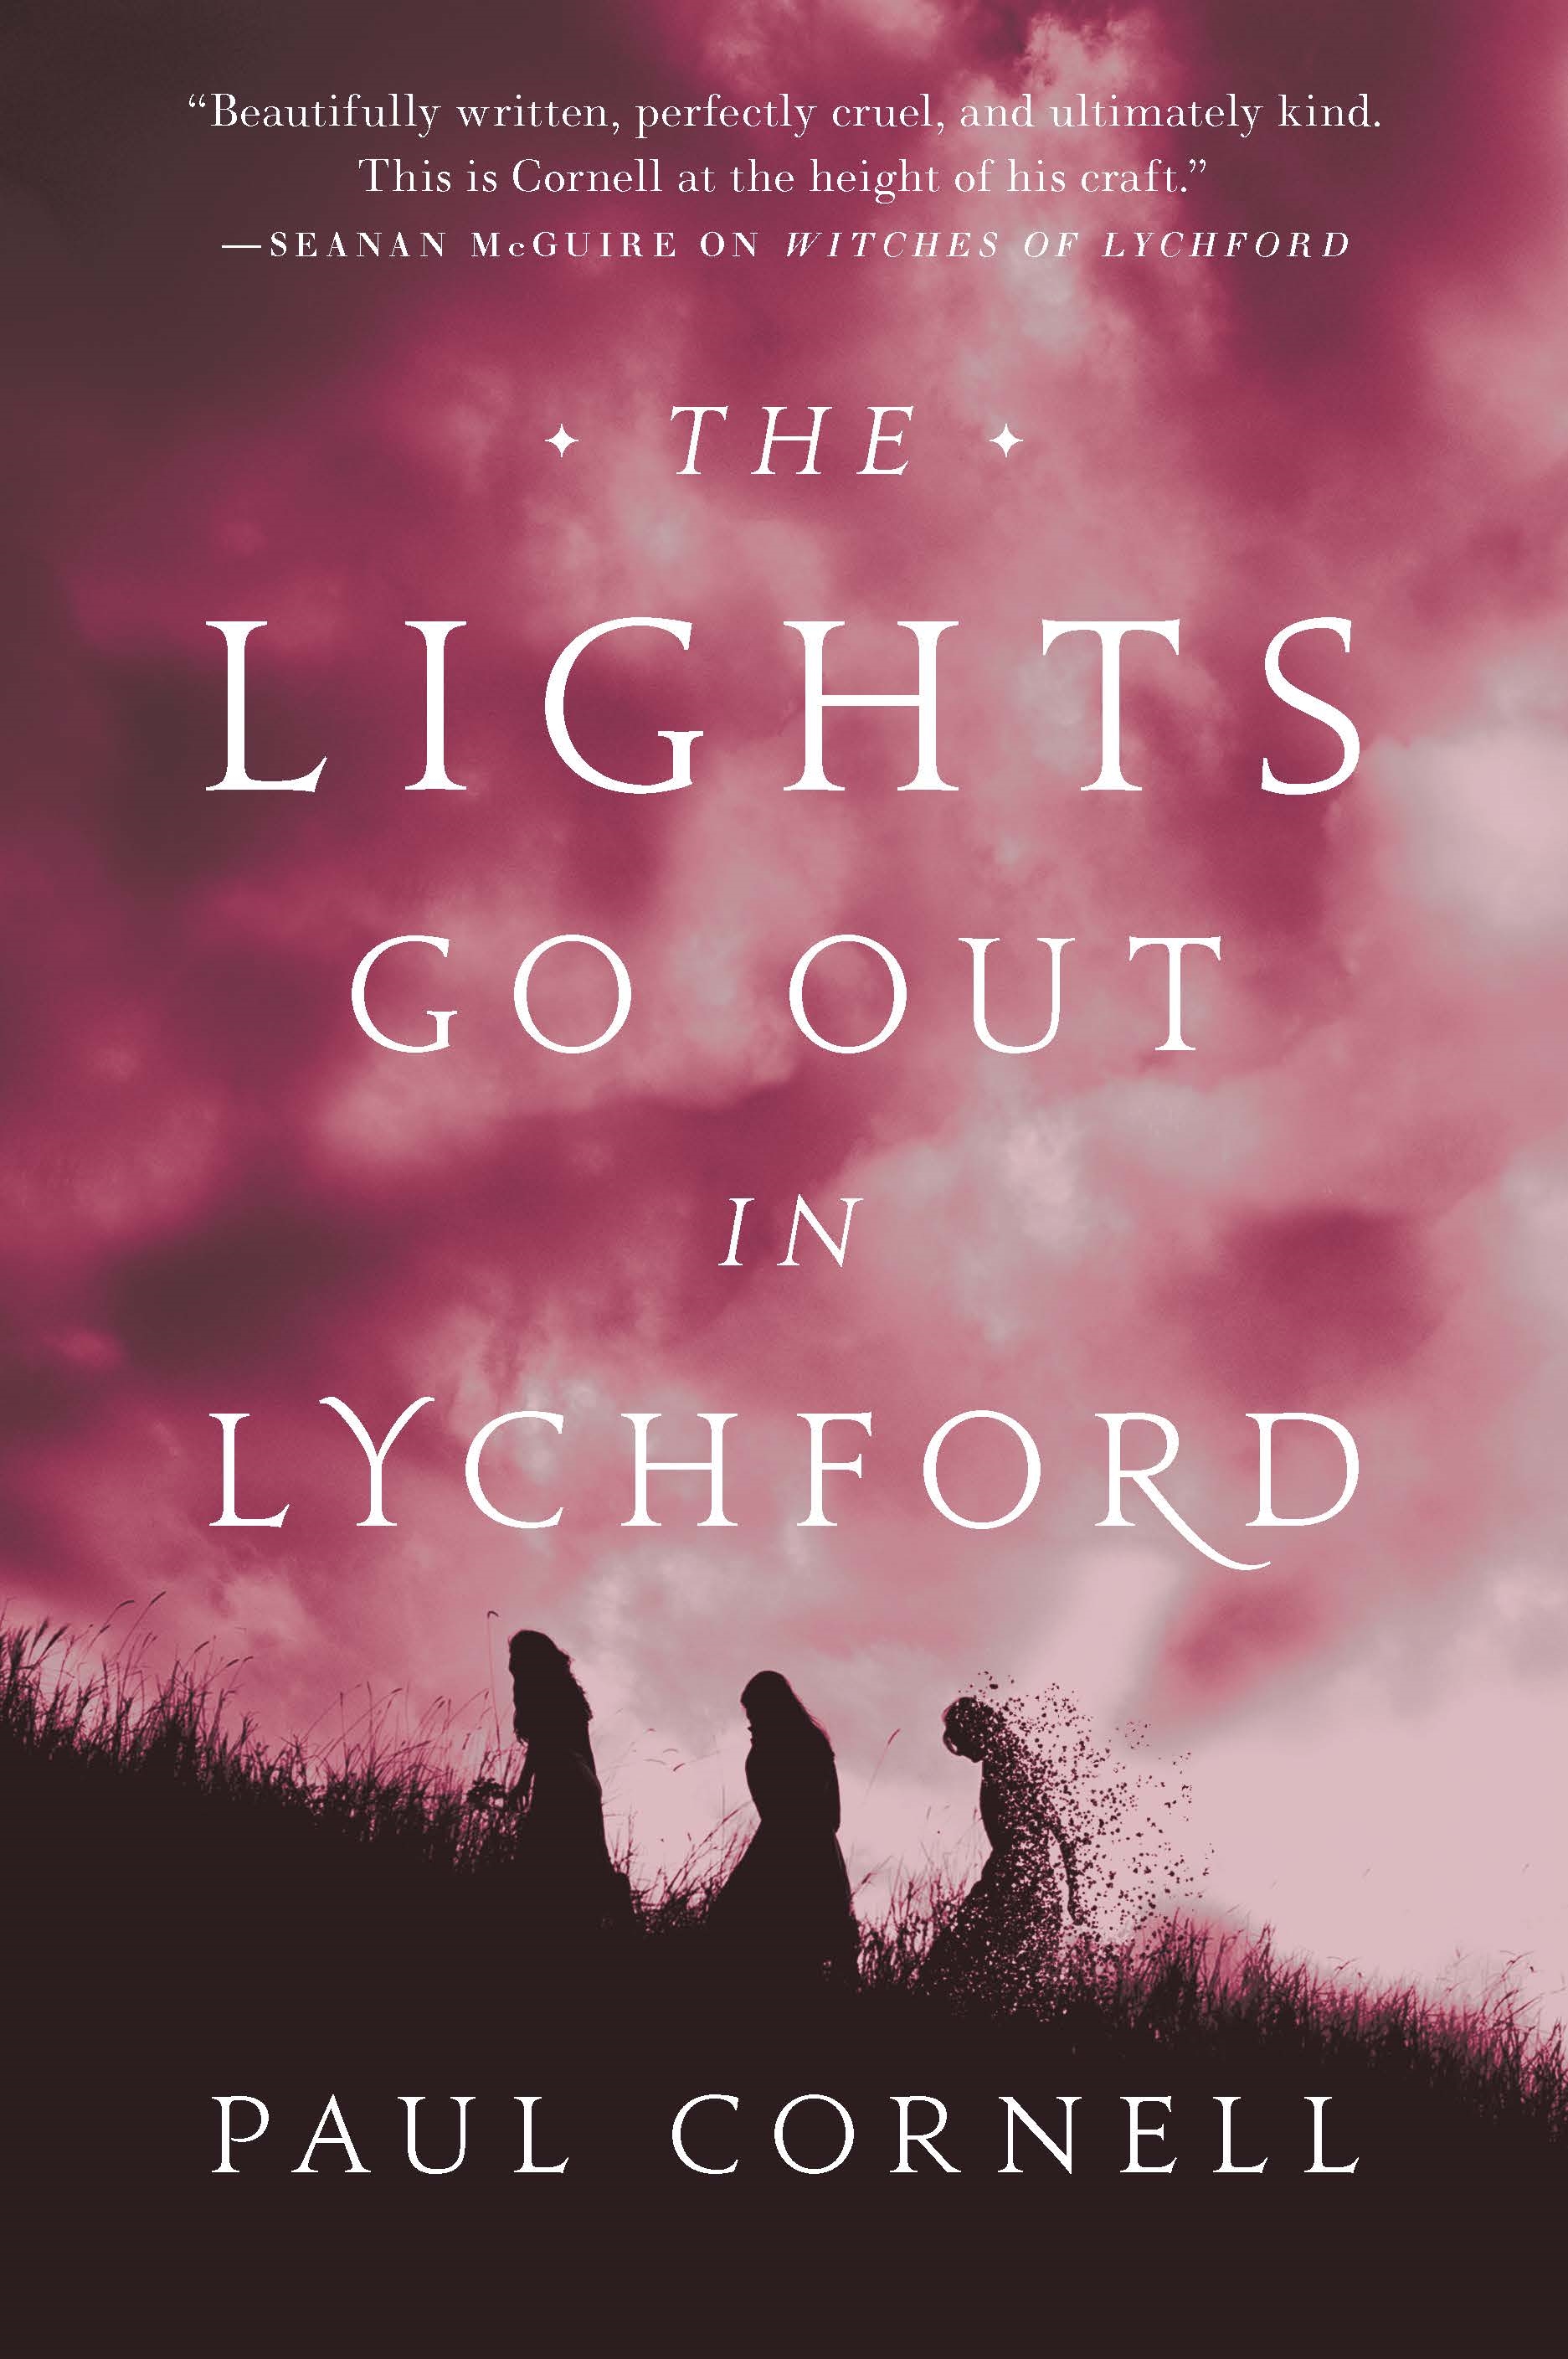 The Lights Go Out in Lychford by Paul Cornell